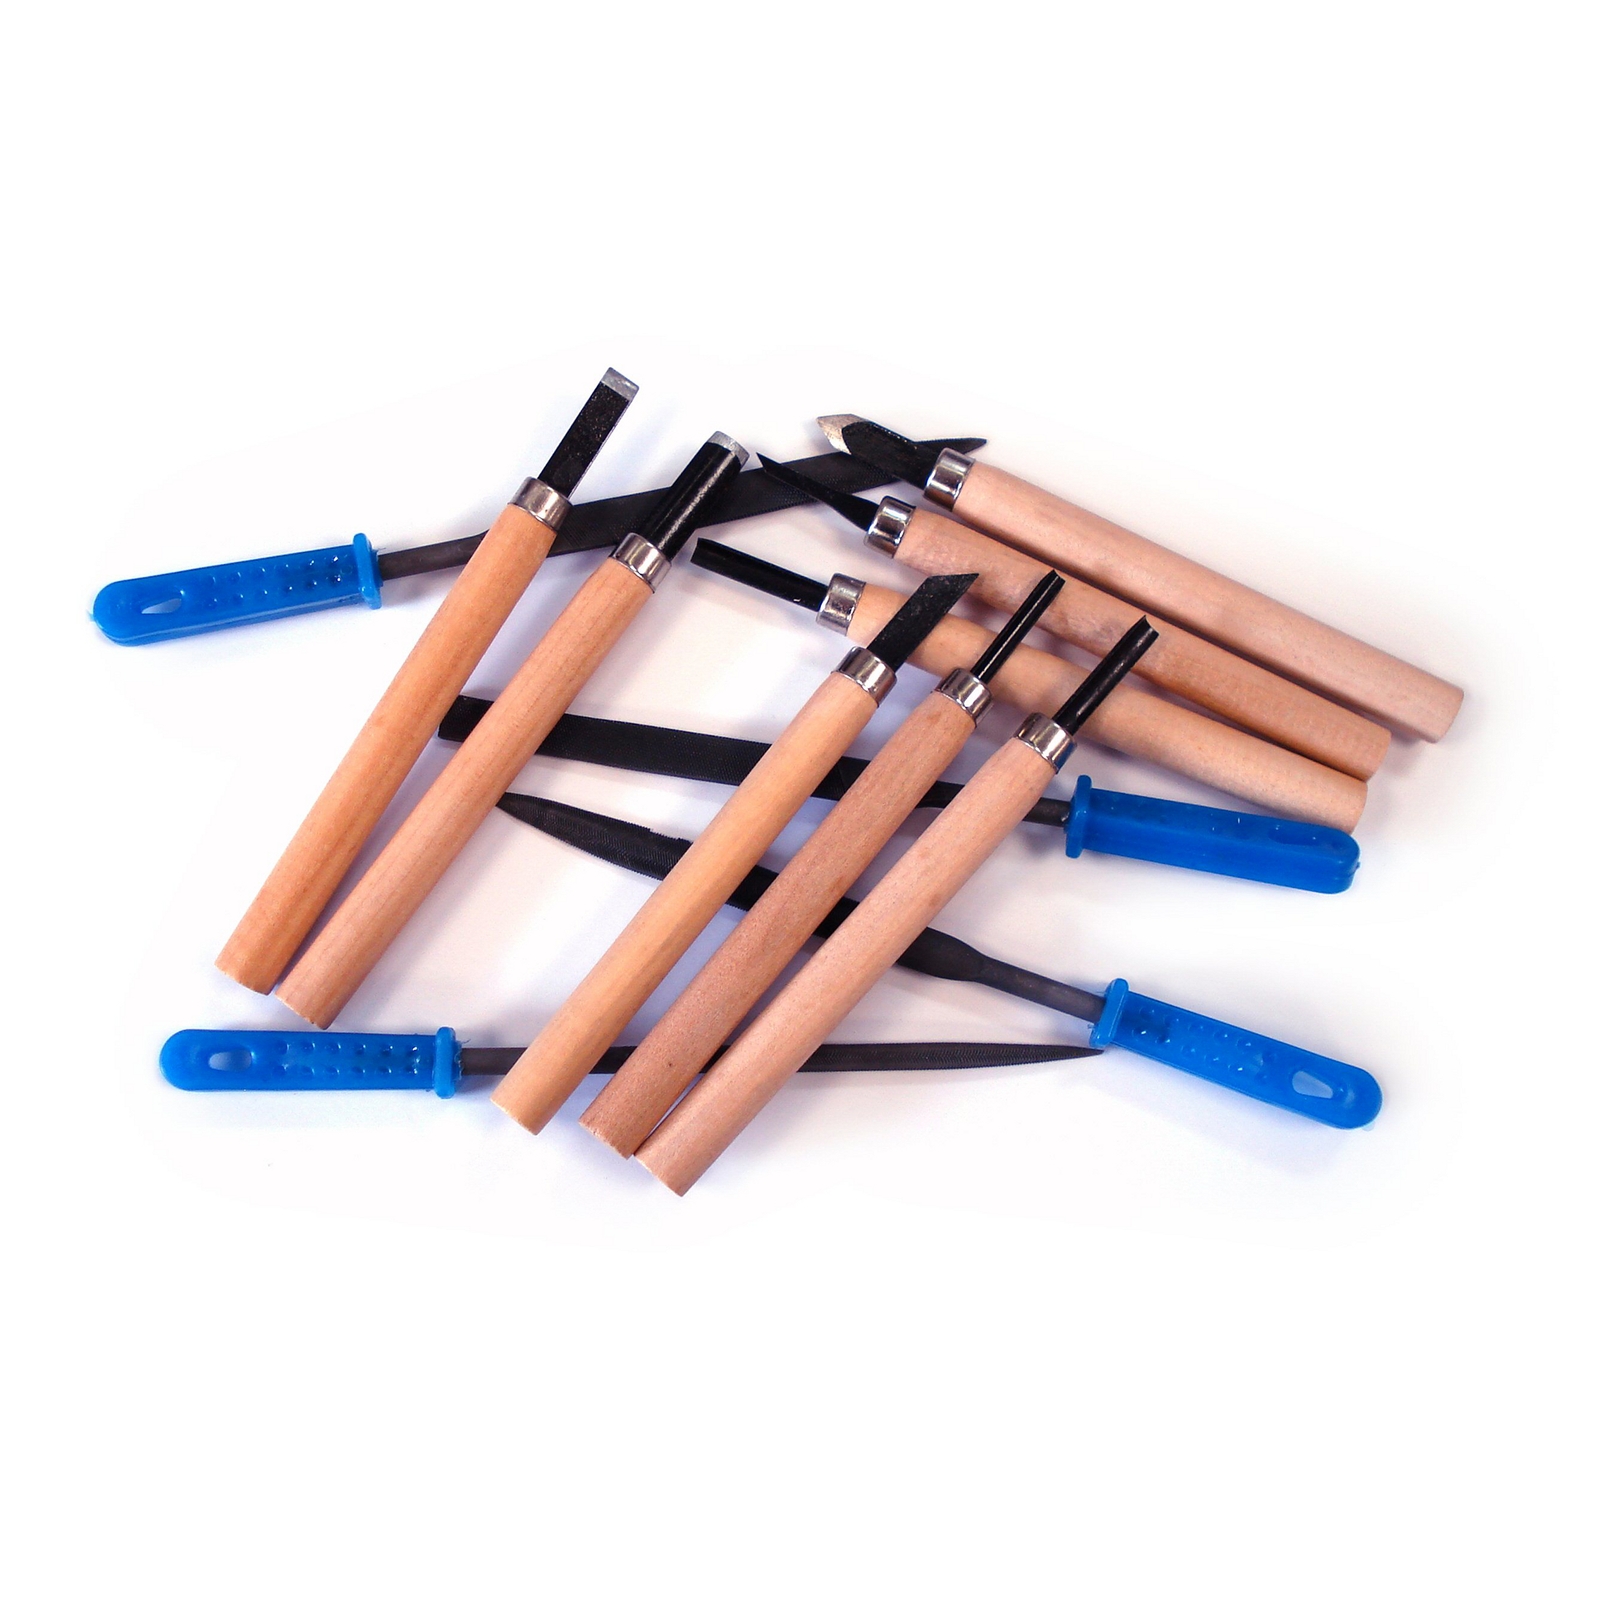 Modelling and Carving Tools - Assorted - Pack of 12